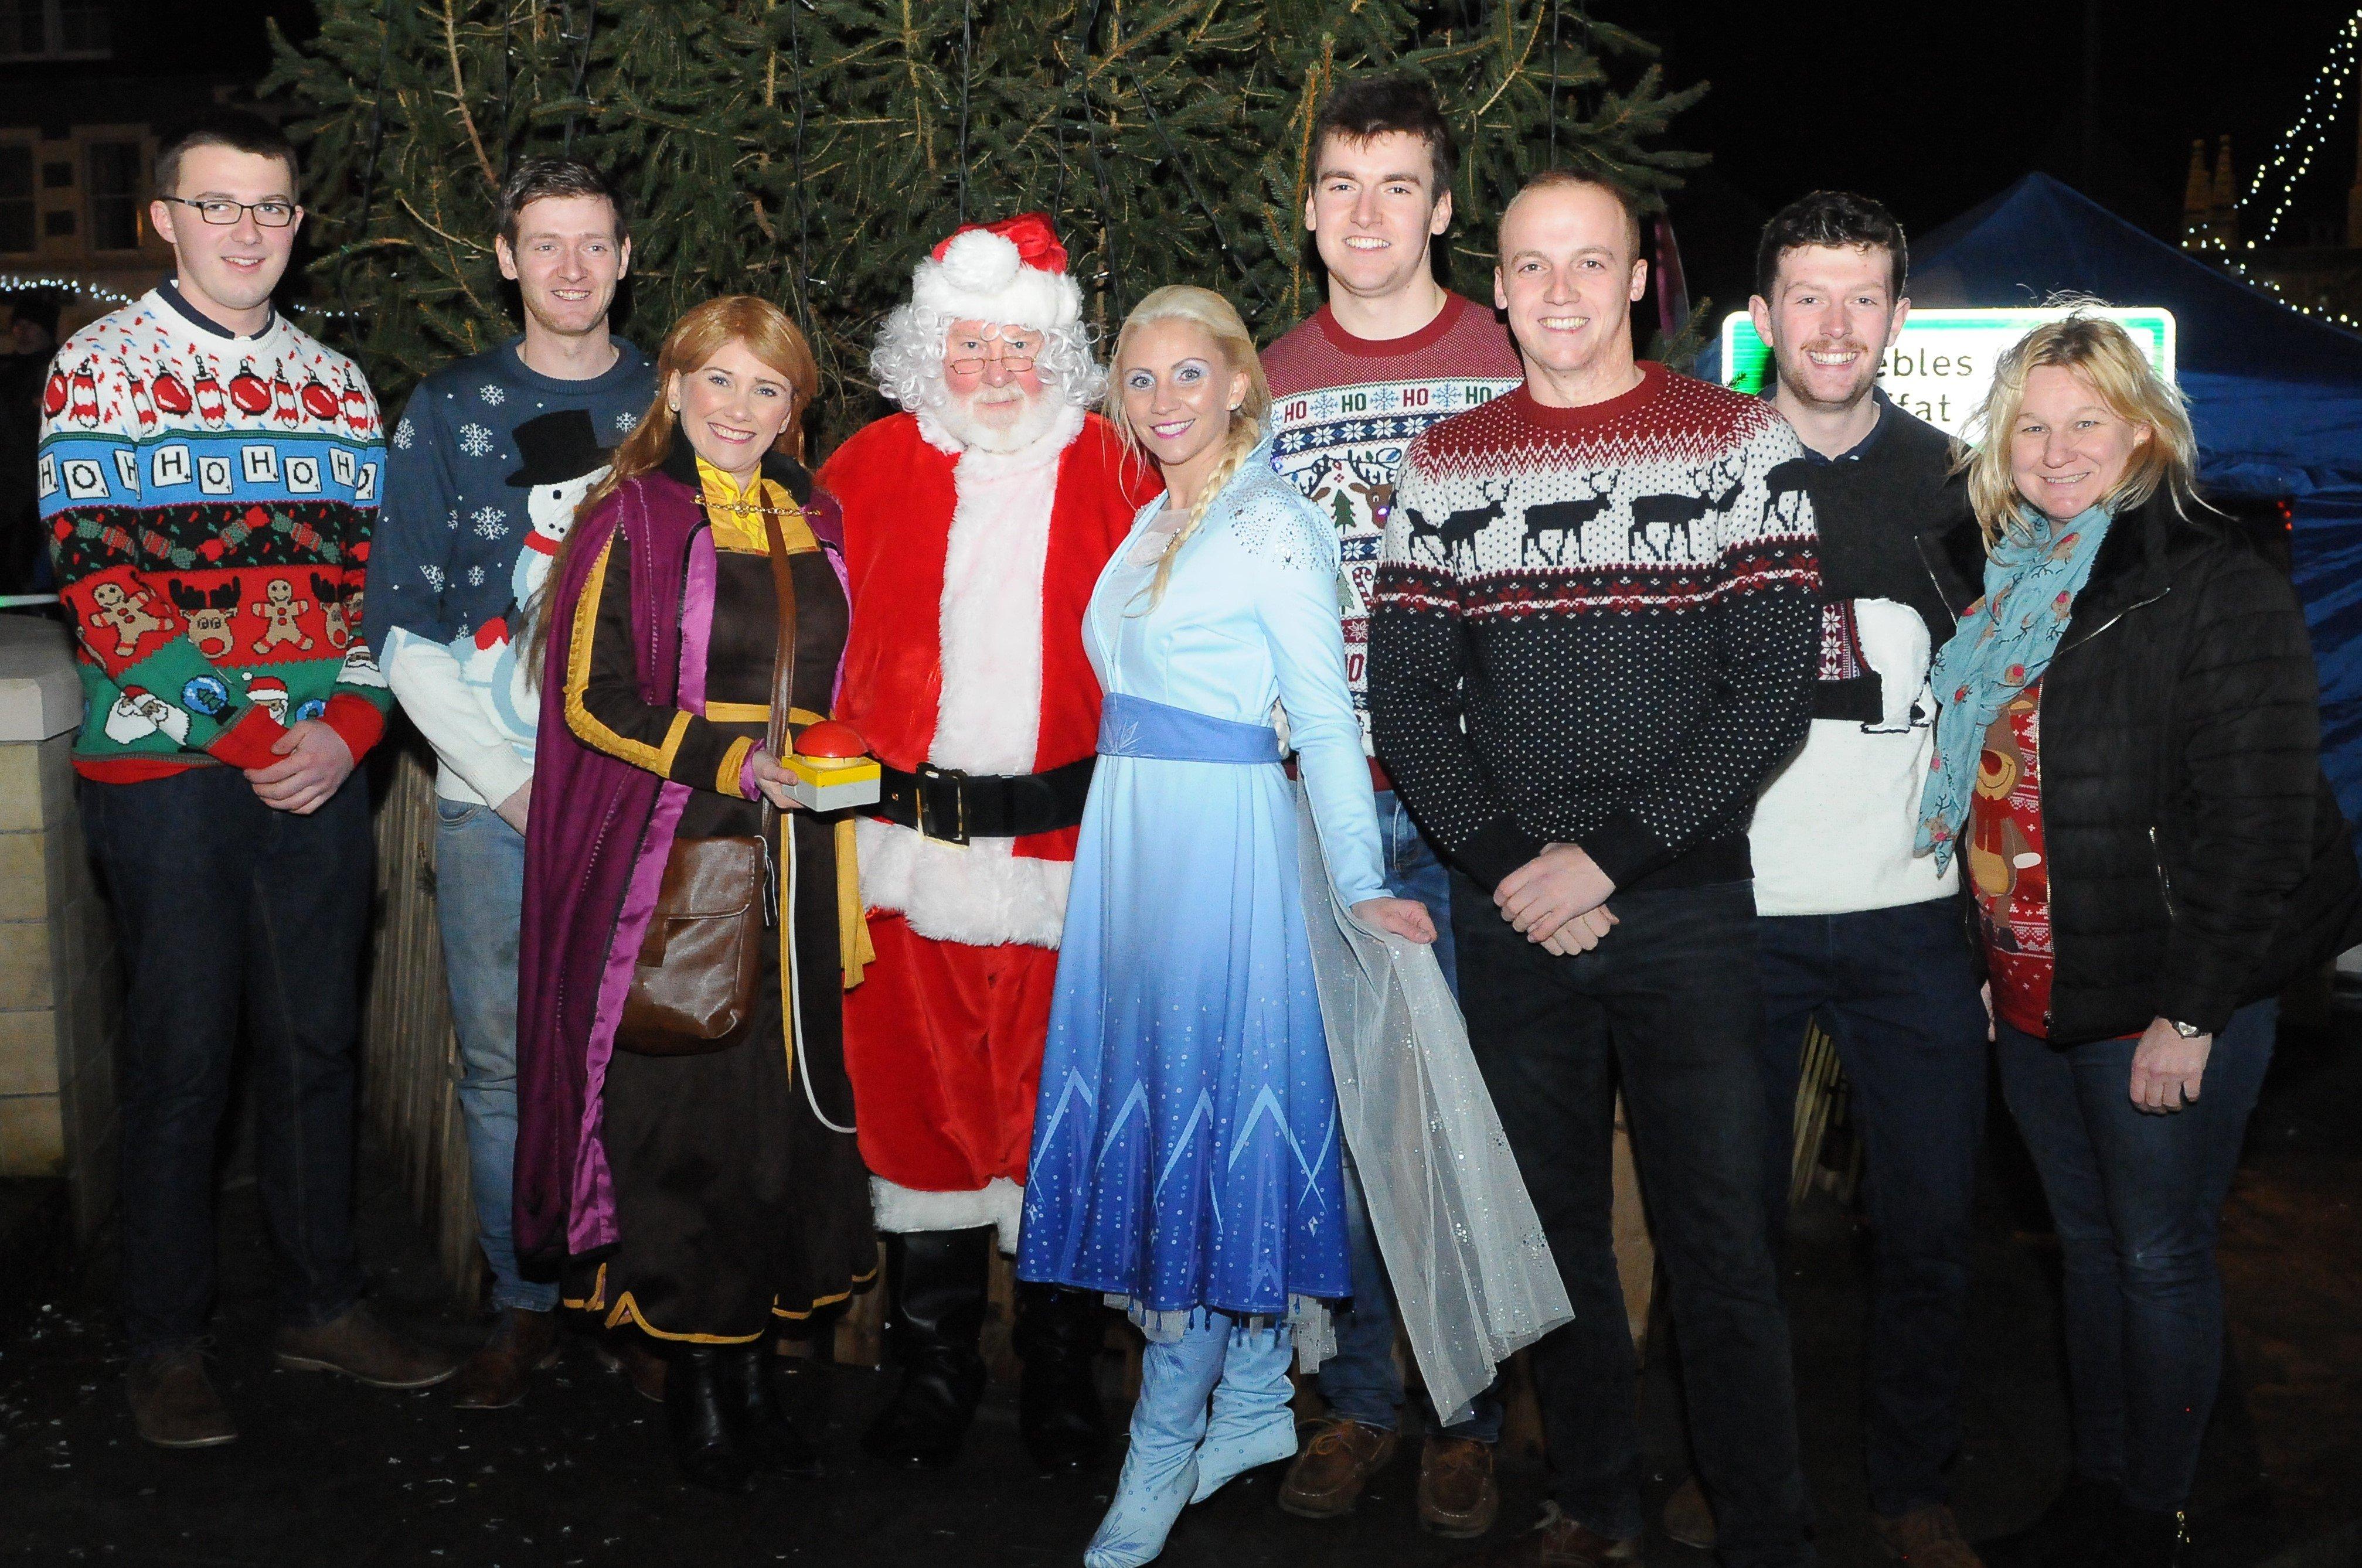 Attendant Conall Fairbain,2019 standard bearer Craig Monks, Anna from Frozen, Santa, Elsa from Frozen, attendants Andrew McColm, Adam Nichol and Liam Cassidy along with organiser Caroline Pennman at the switch-on.